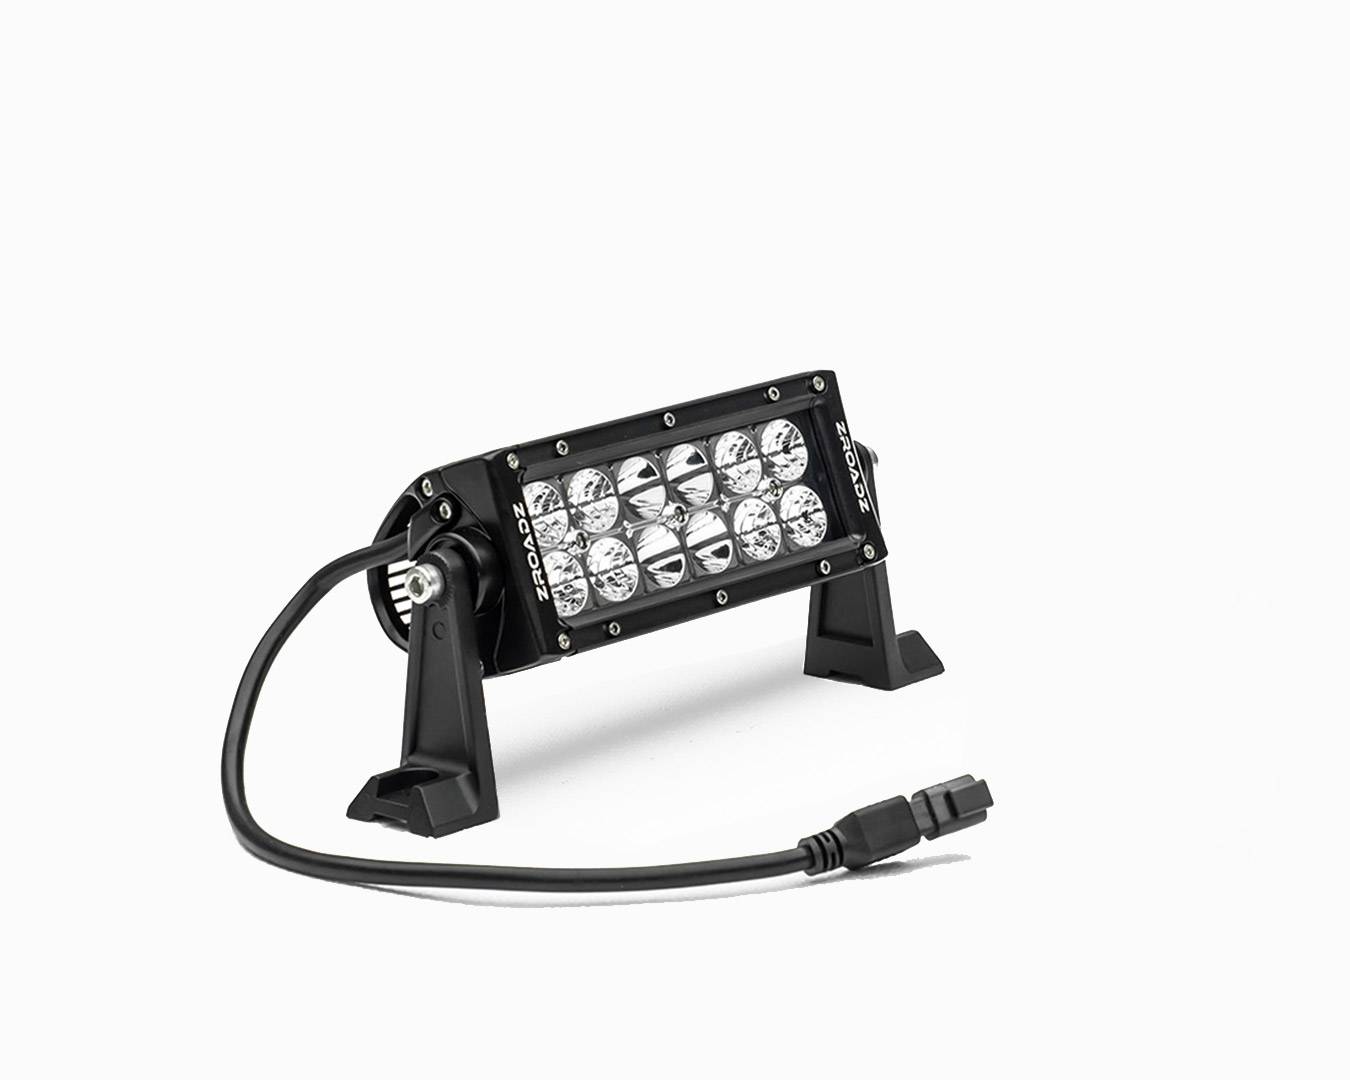 ZROADZ OFF ROAD PRODUCTS - 6 Inch LED Straight Double Row Light Bar - Part # Z30BC14W36